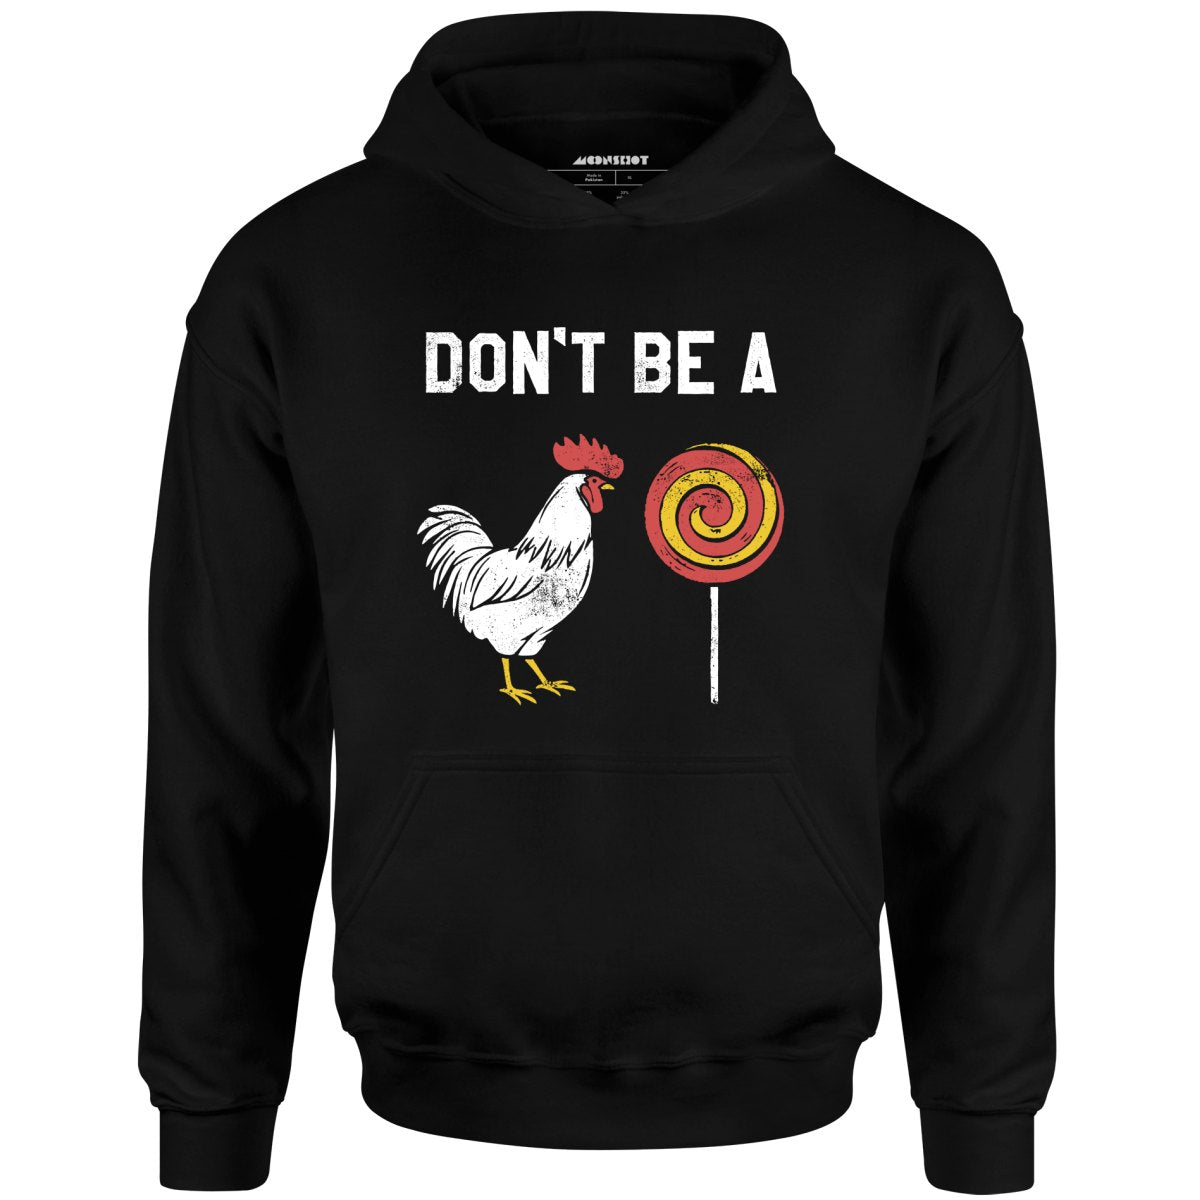 Don't Be a Cocksucker - Unisex Hoodie